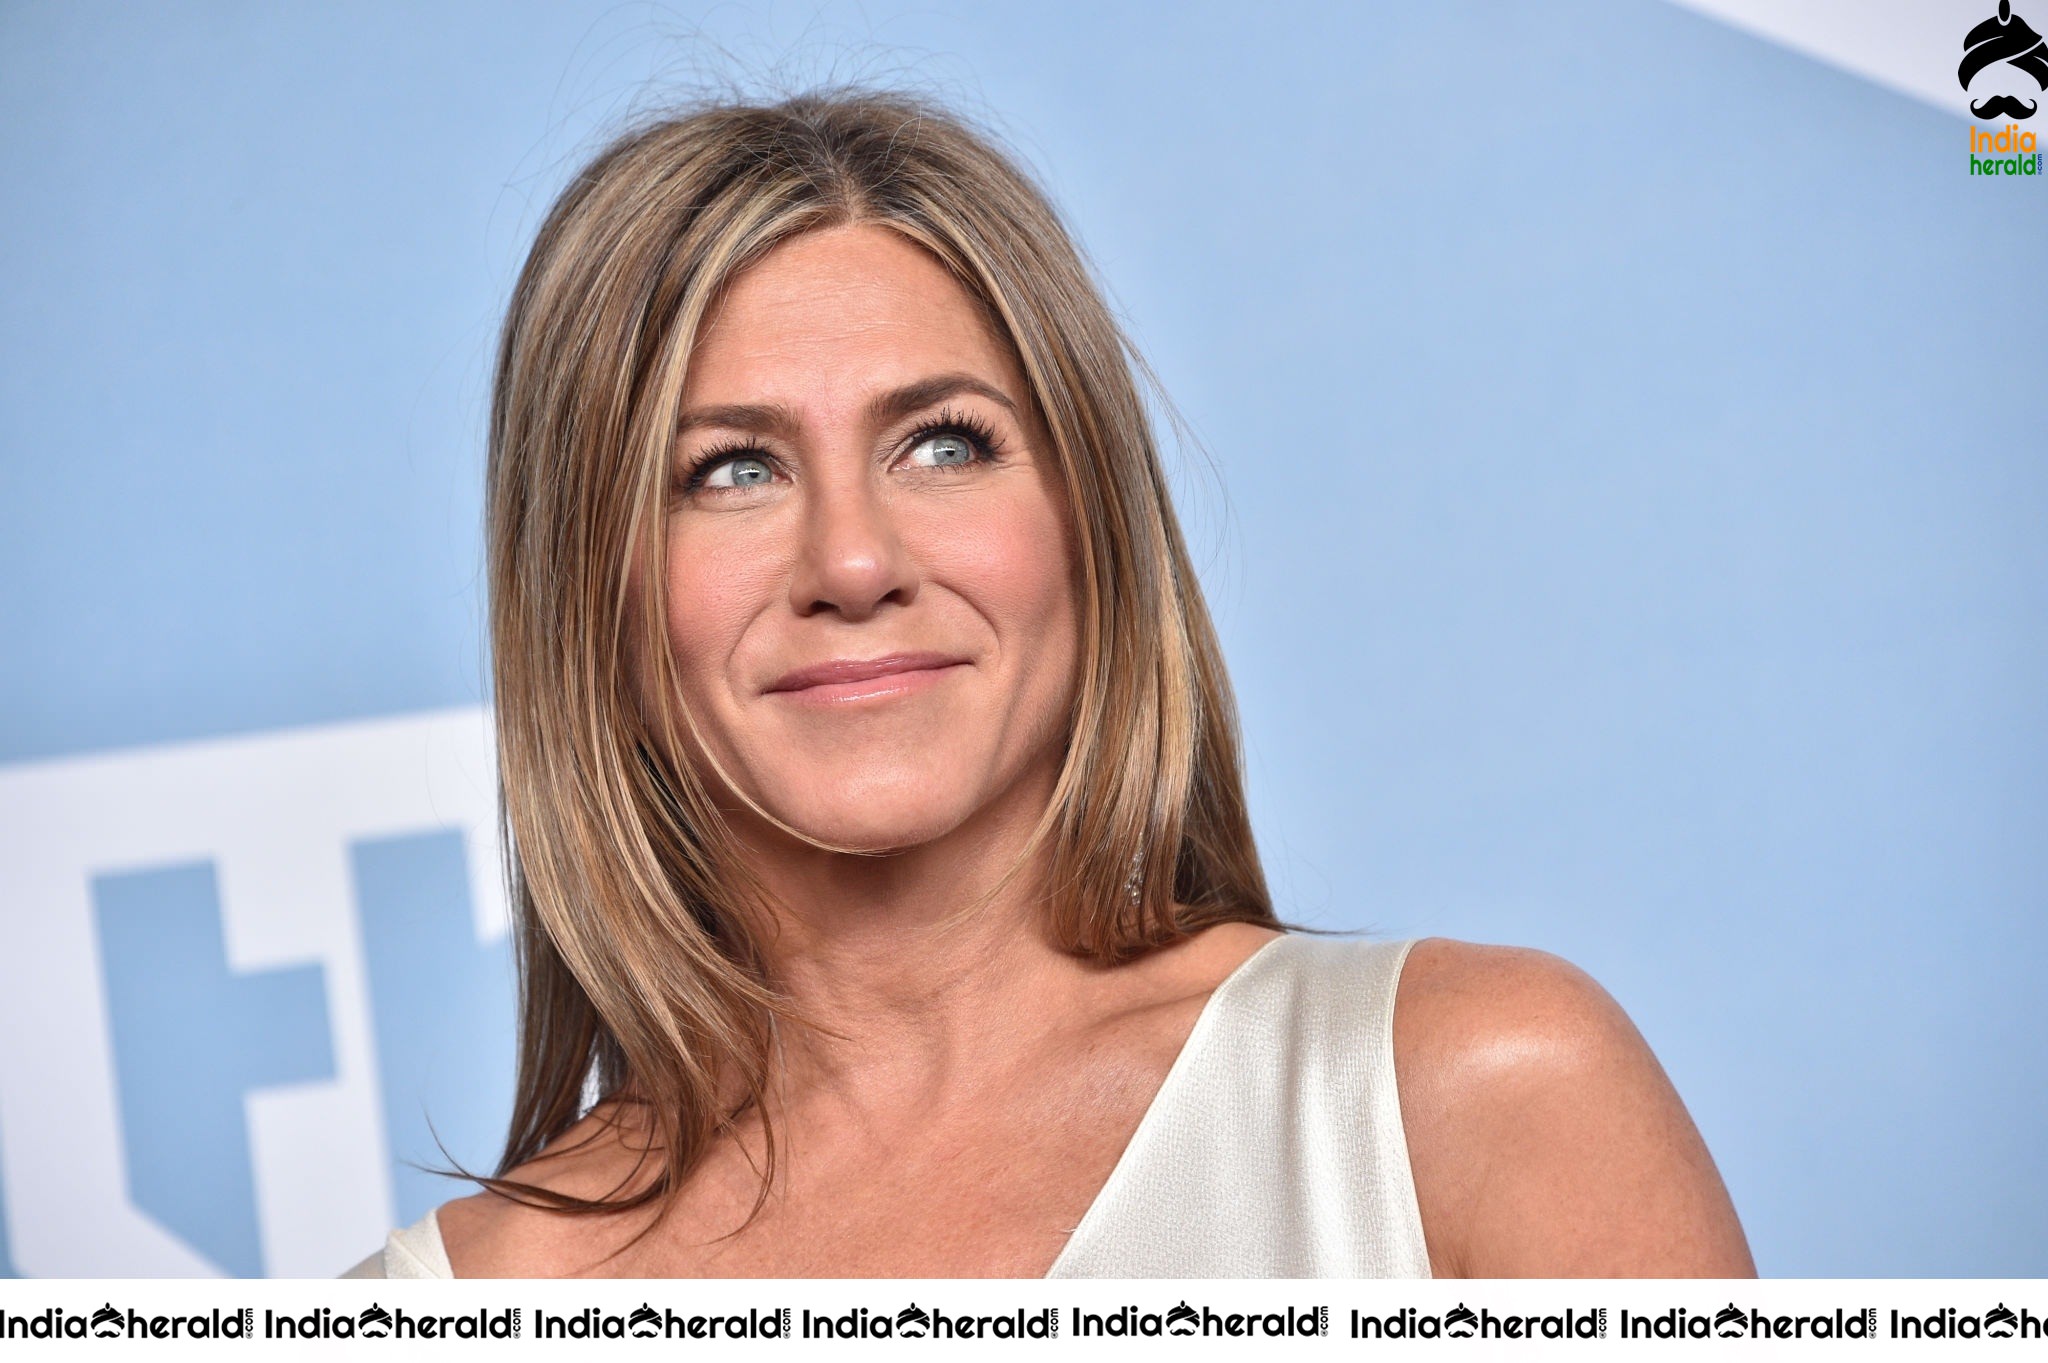 Jennifer Aniston at the 26th Annual Screen Actors Guild Awards at The Shrine Auditorium in Los Angeles Set 1